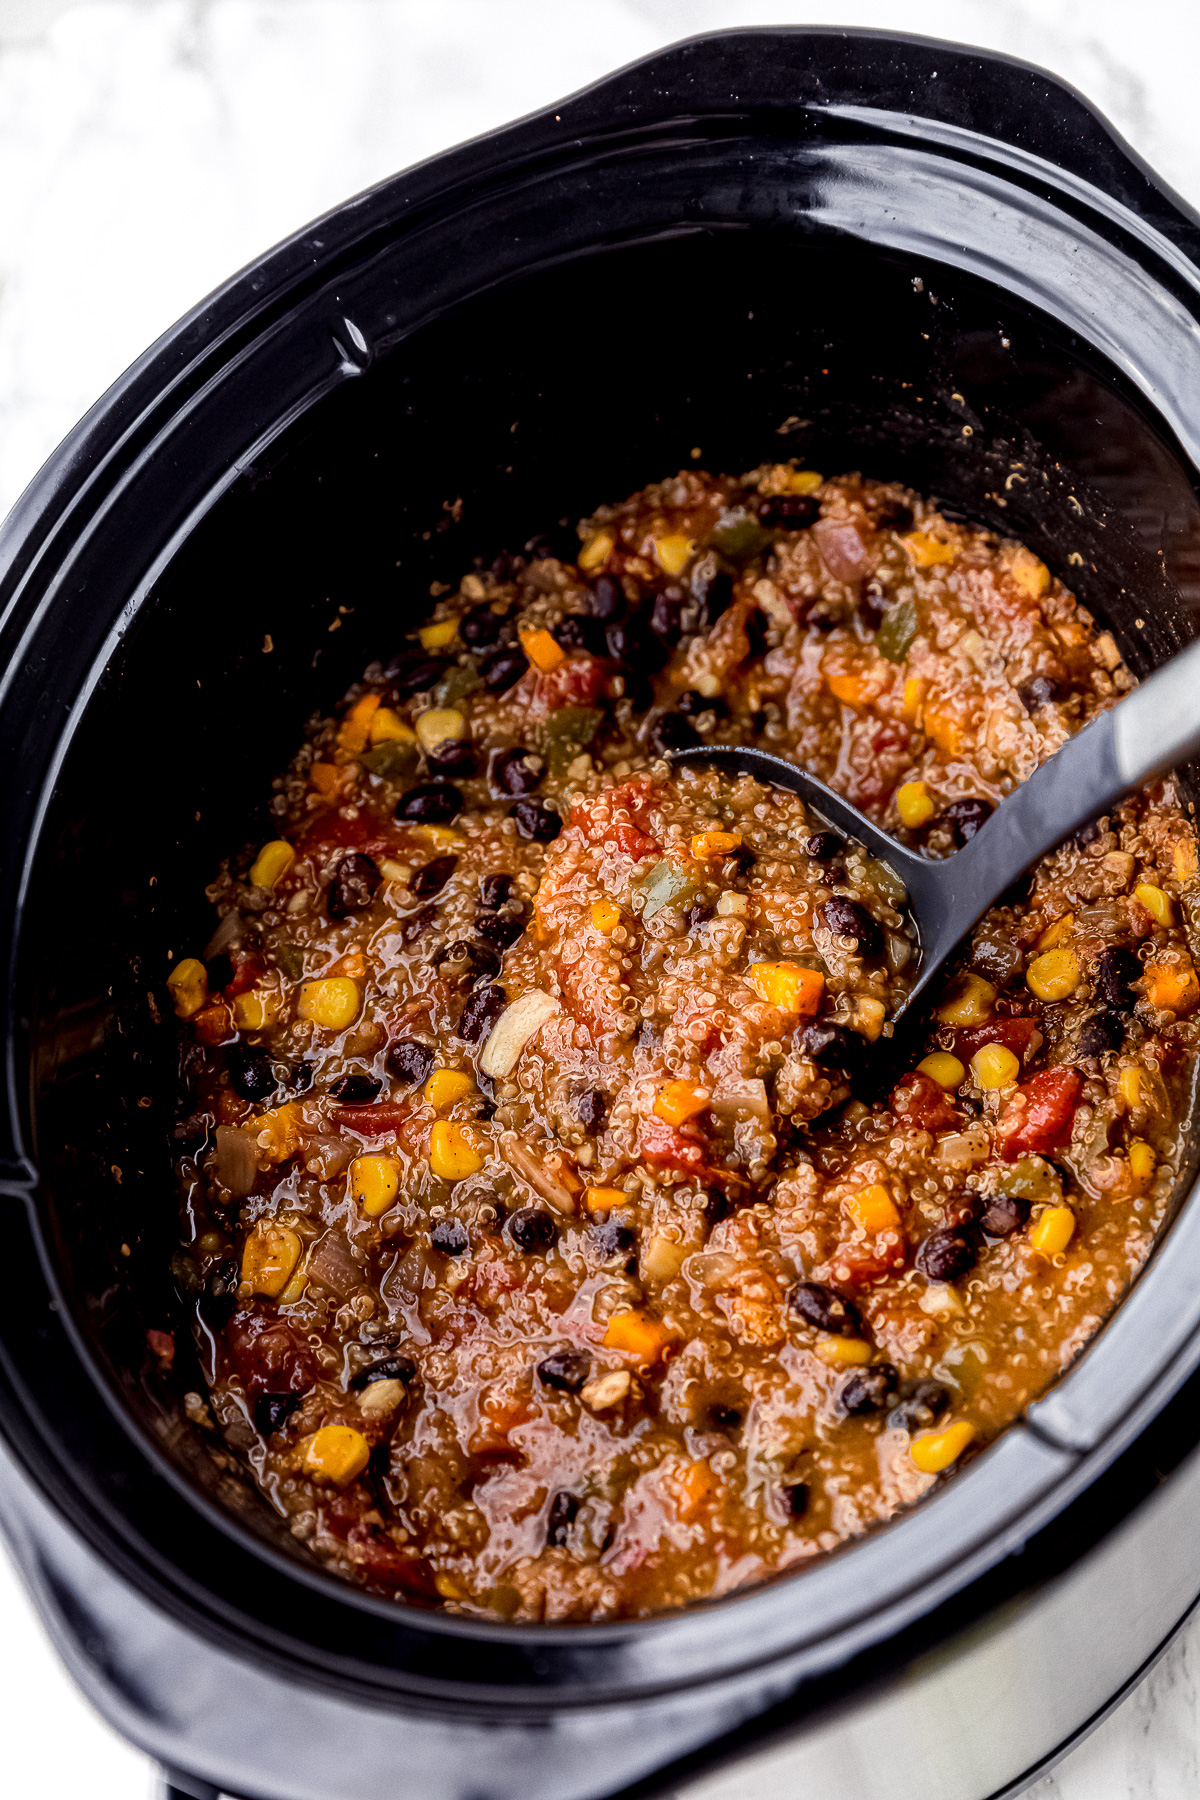 A full ladle in a slow cooker full of chili